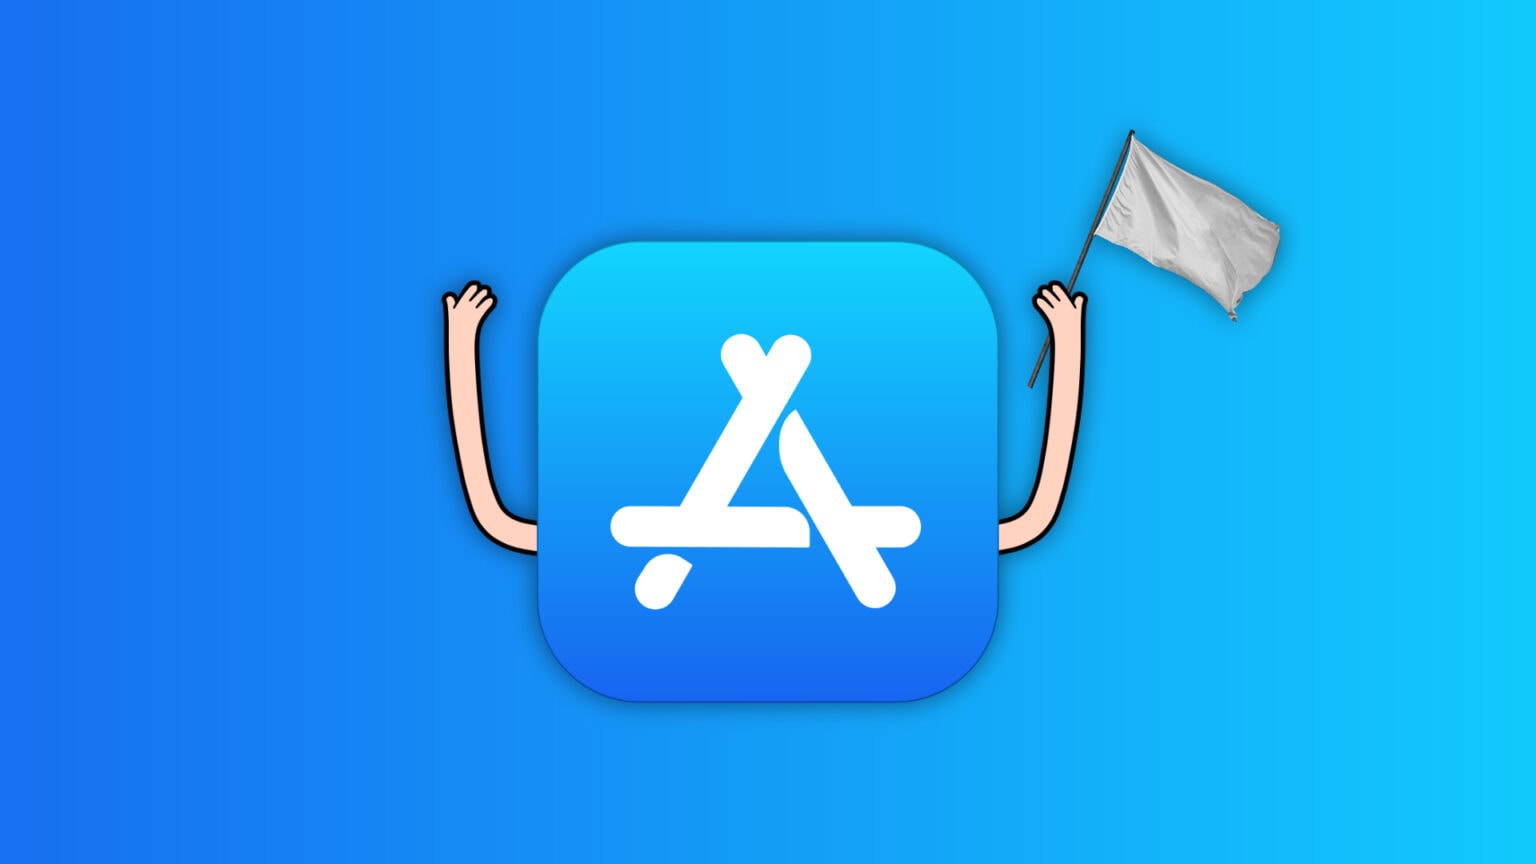 App Store will accept alternative payment systems